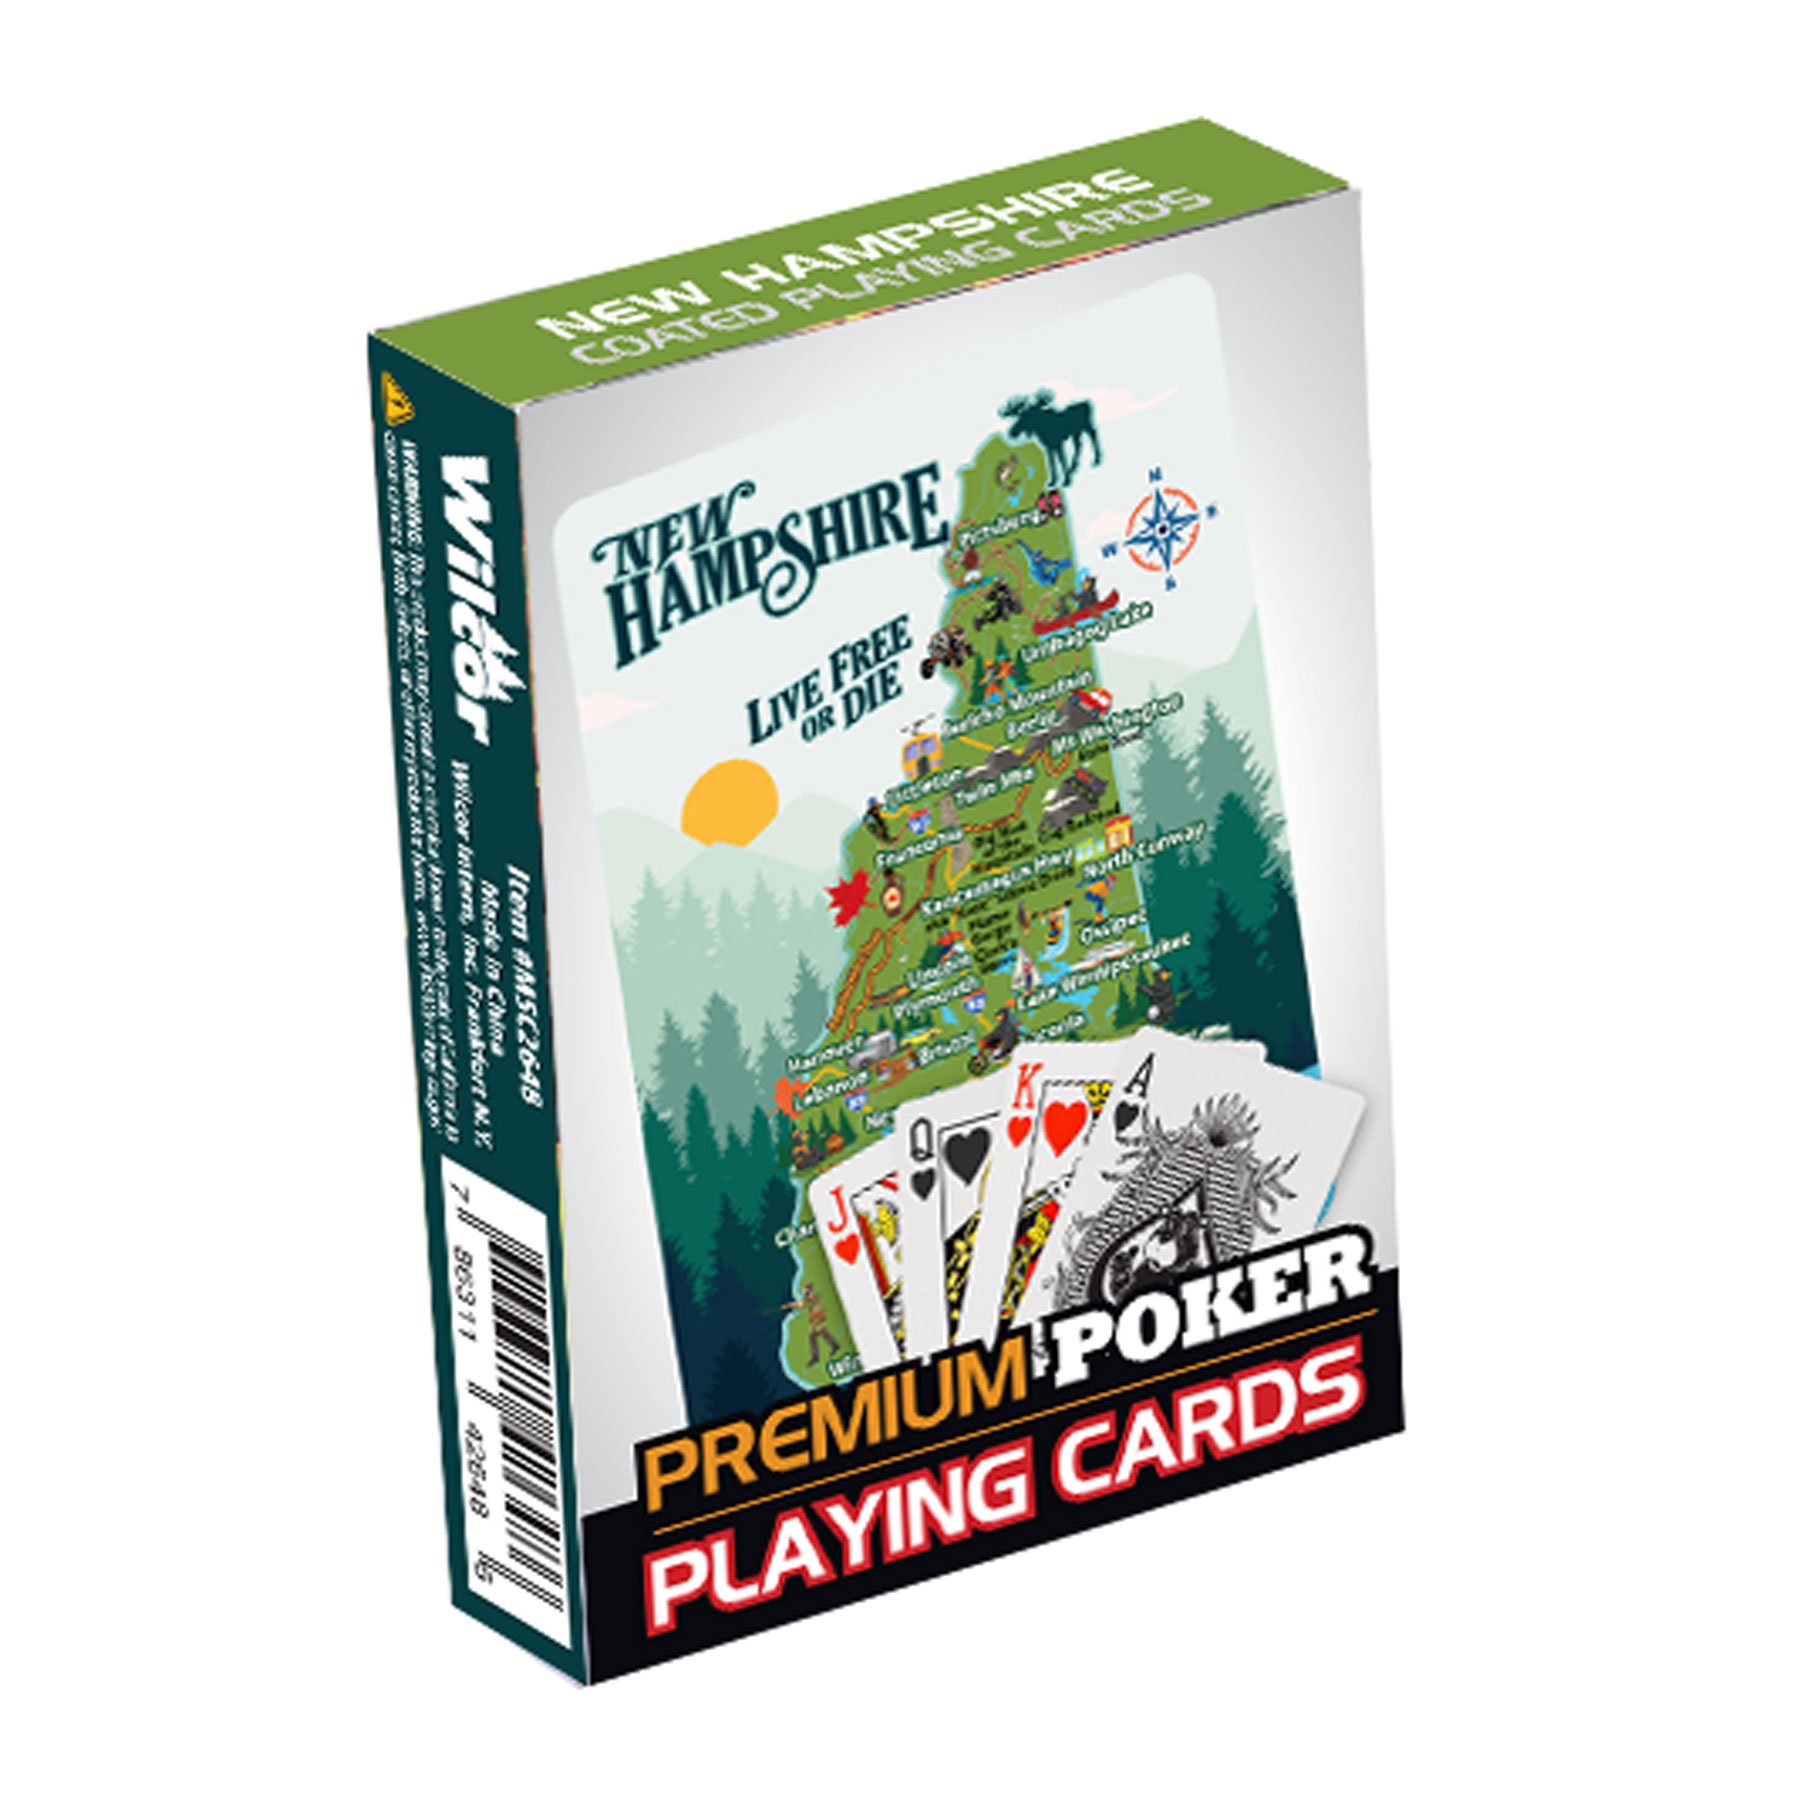 NEW HAMPSHIRE MAP PLAYING CARDS